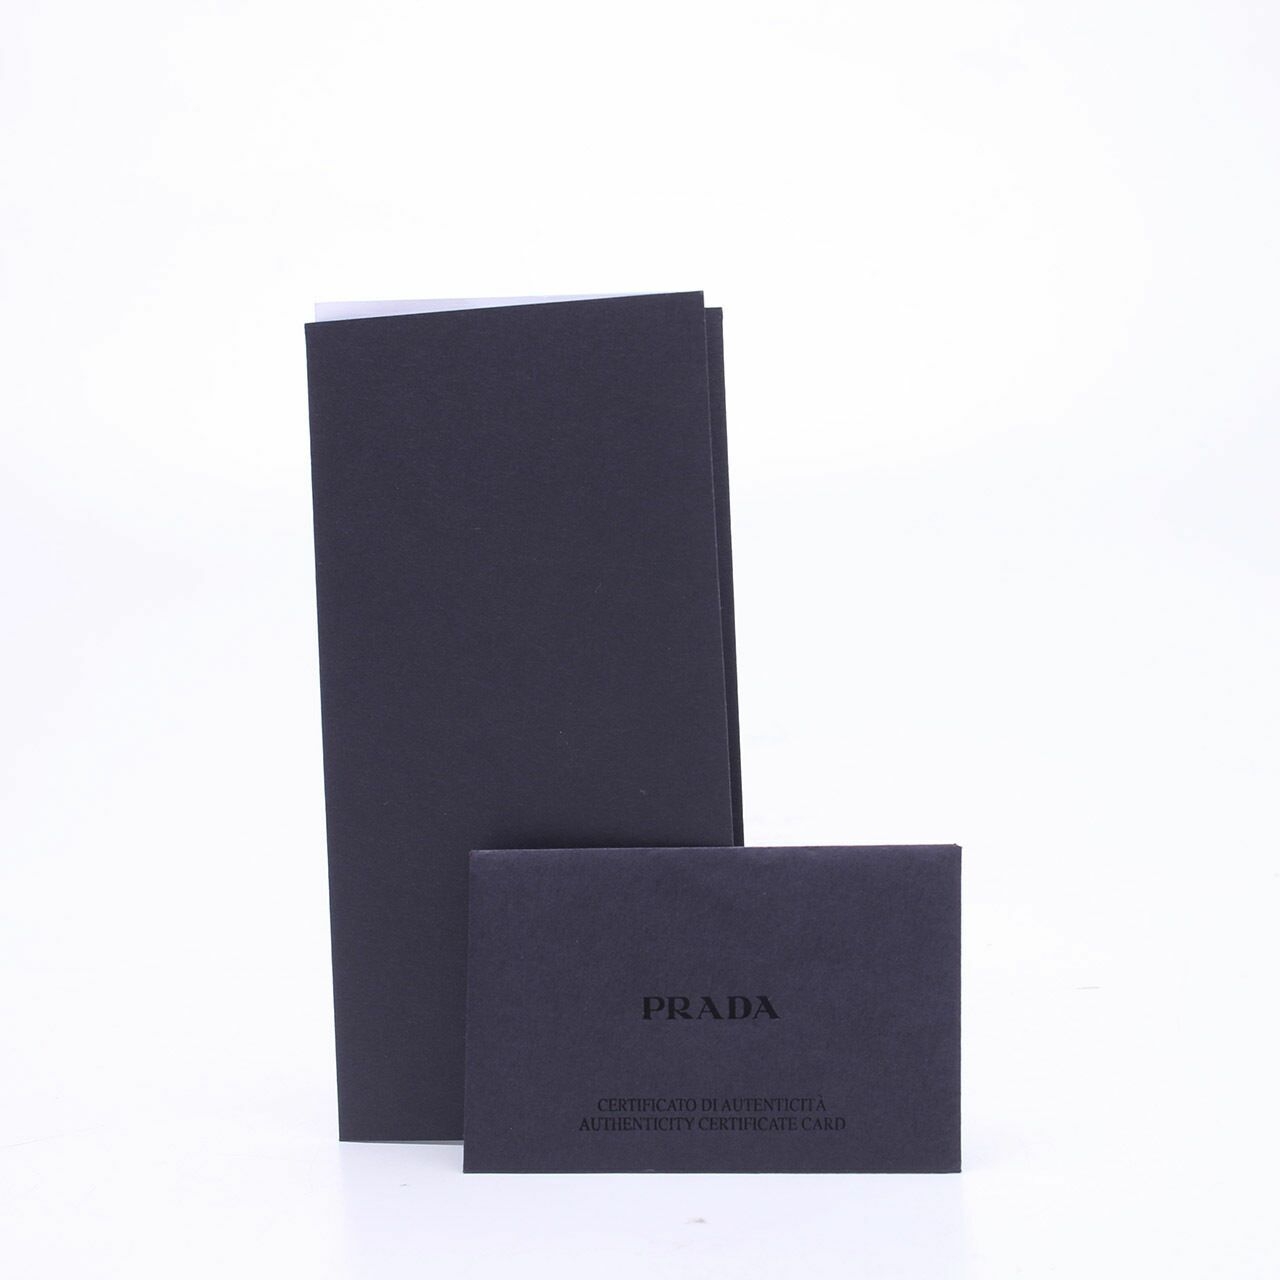 Prada Nude Metal Leather Wallet Cameo Chain  Clutch